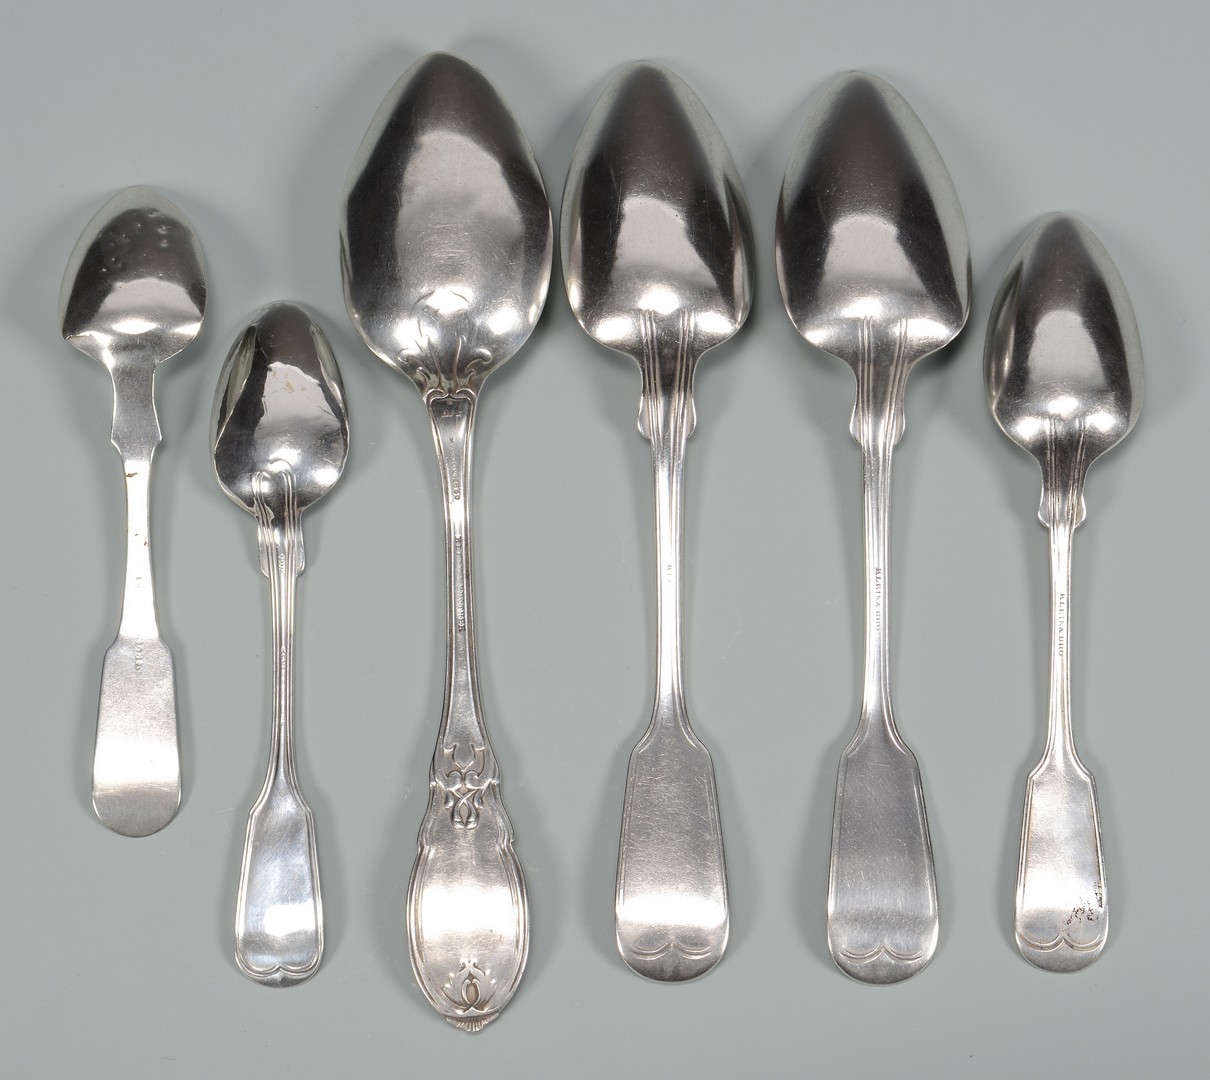 Lot 77: 6 Klein Miss. coin silver spoons